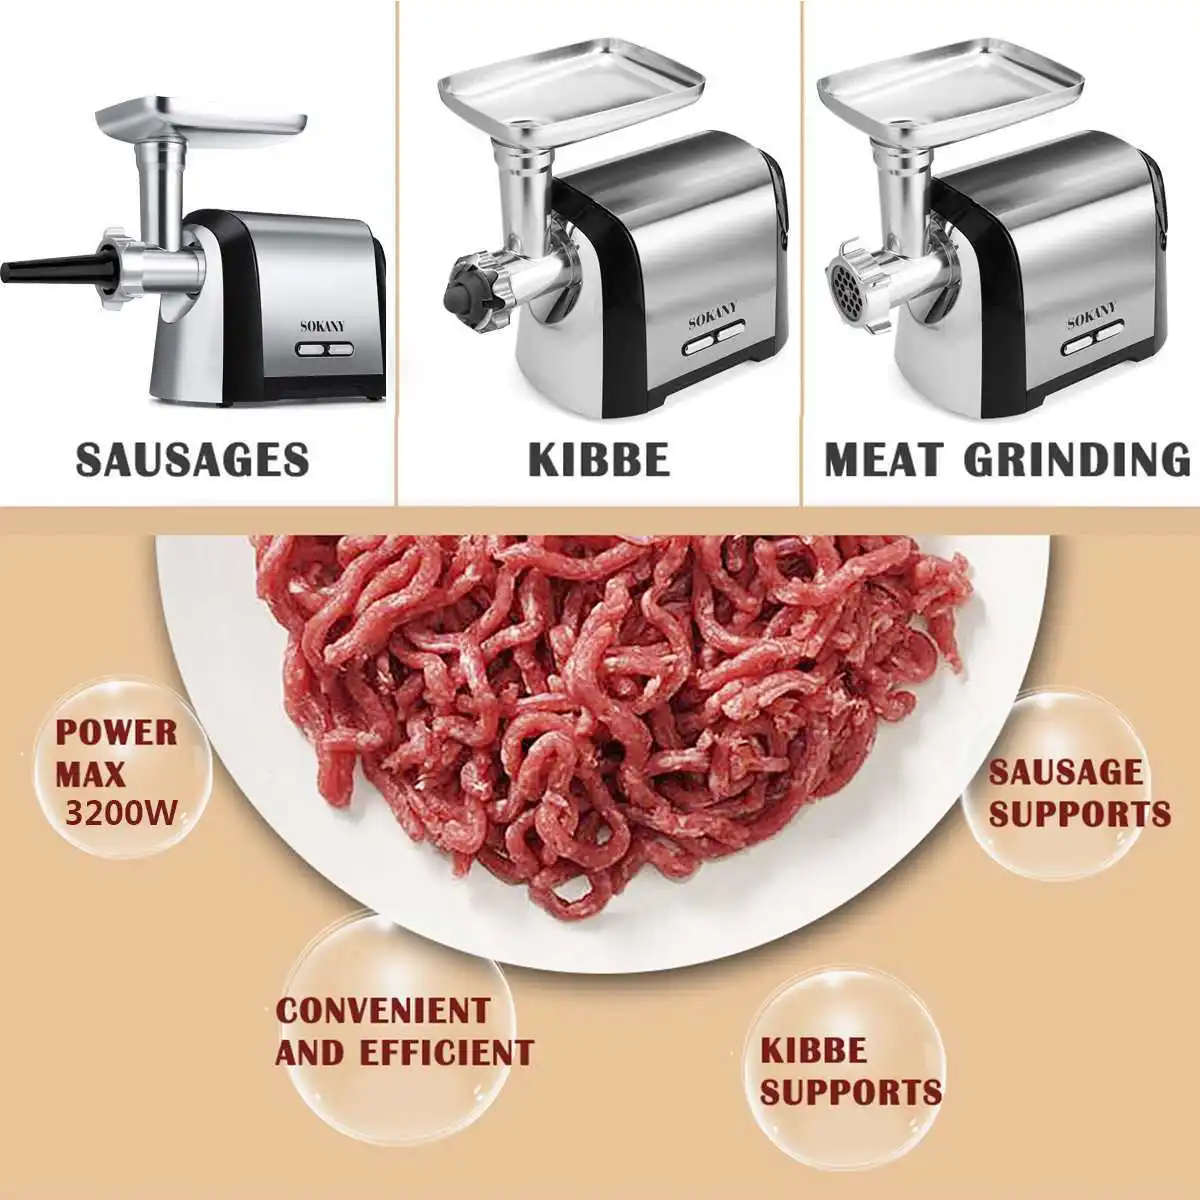 https://ae01.alicdn.com/kf/S3a88b49f131f460b90c811b1ffae5d2aR/SK-088-Household-Electric-Meat-Grinder-Stainless-Steel-3200W-High-Power-Fully-Automatic-Meat-Grinder.jpg